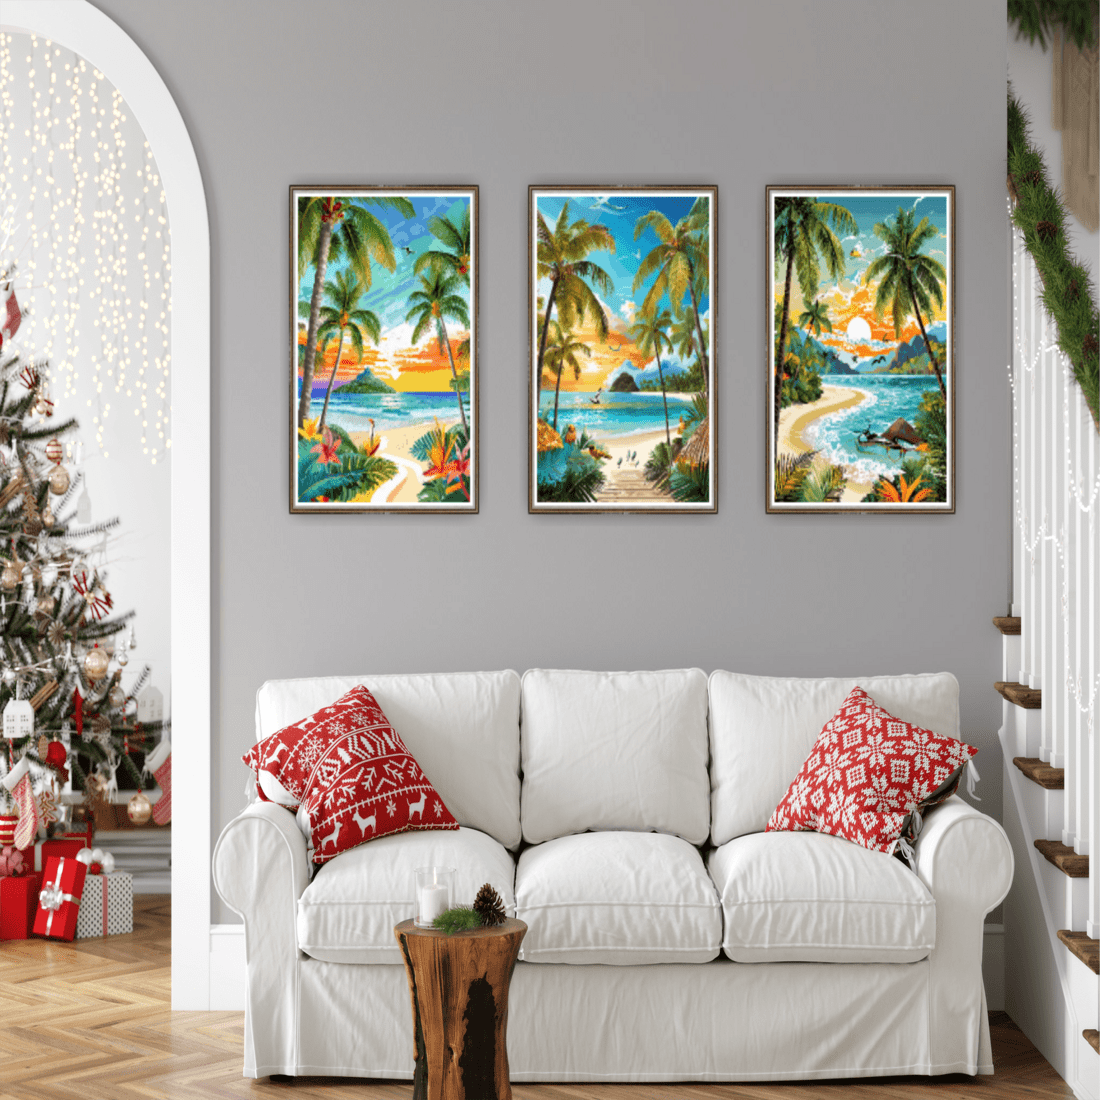 Tropical Bliss: Explore Paradise with Exquisite Wall Art (Set of 6 images) preview image.